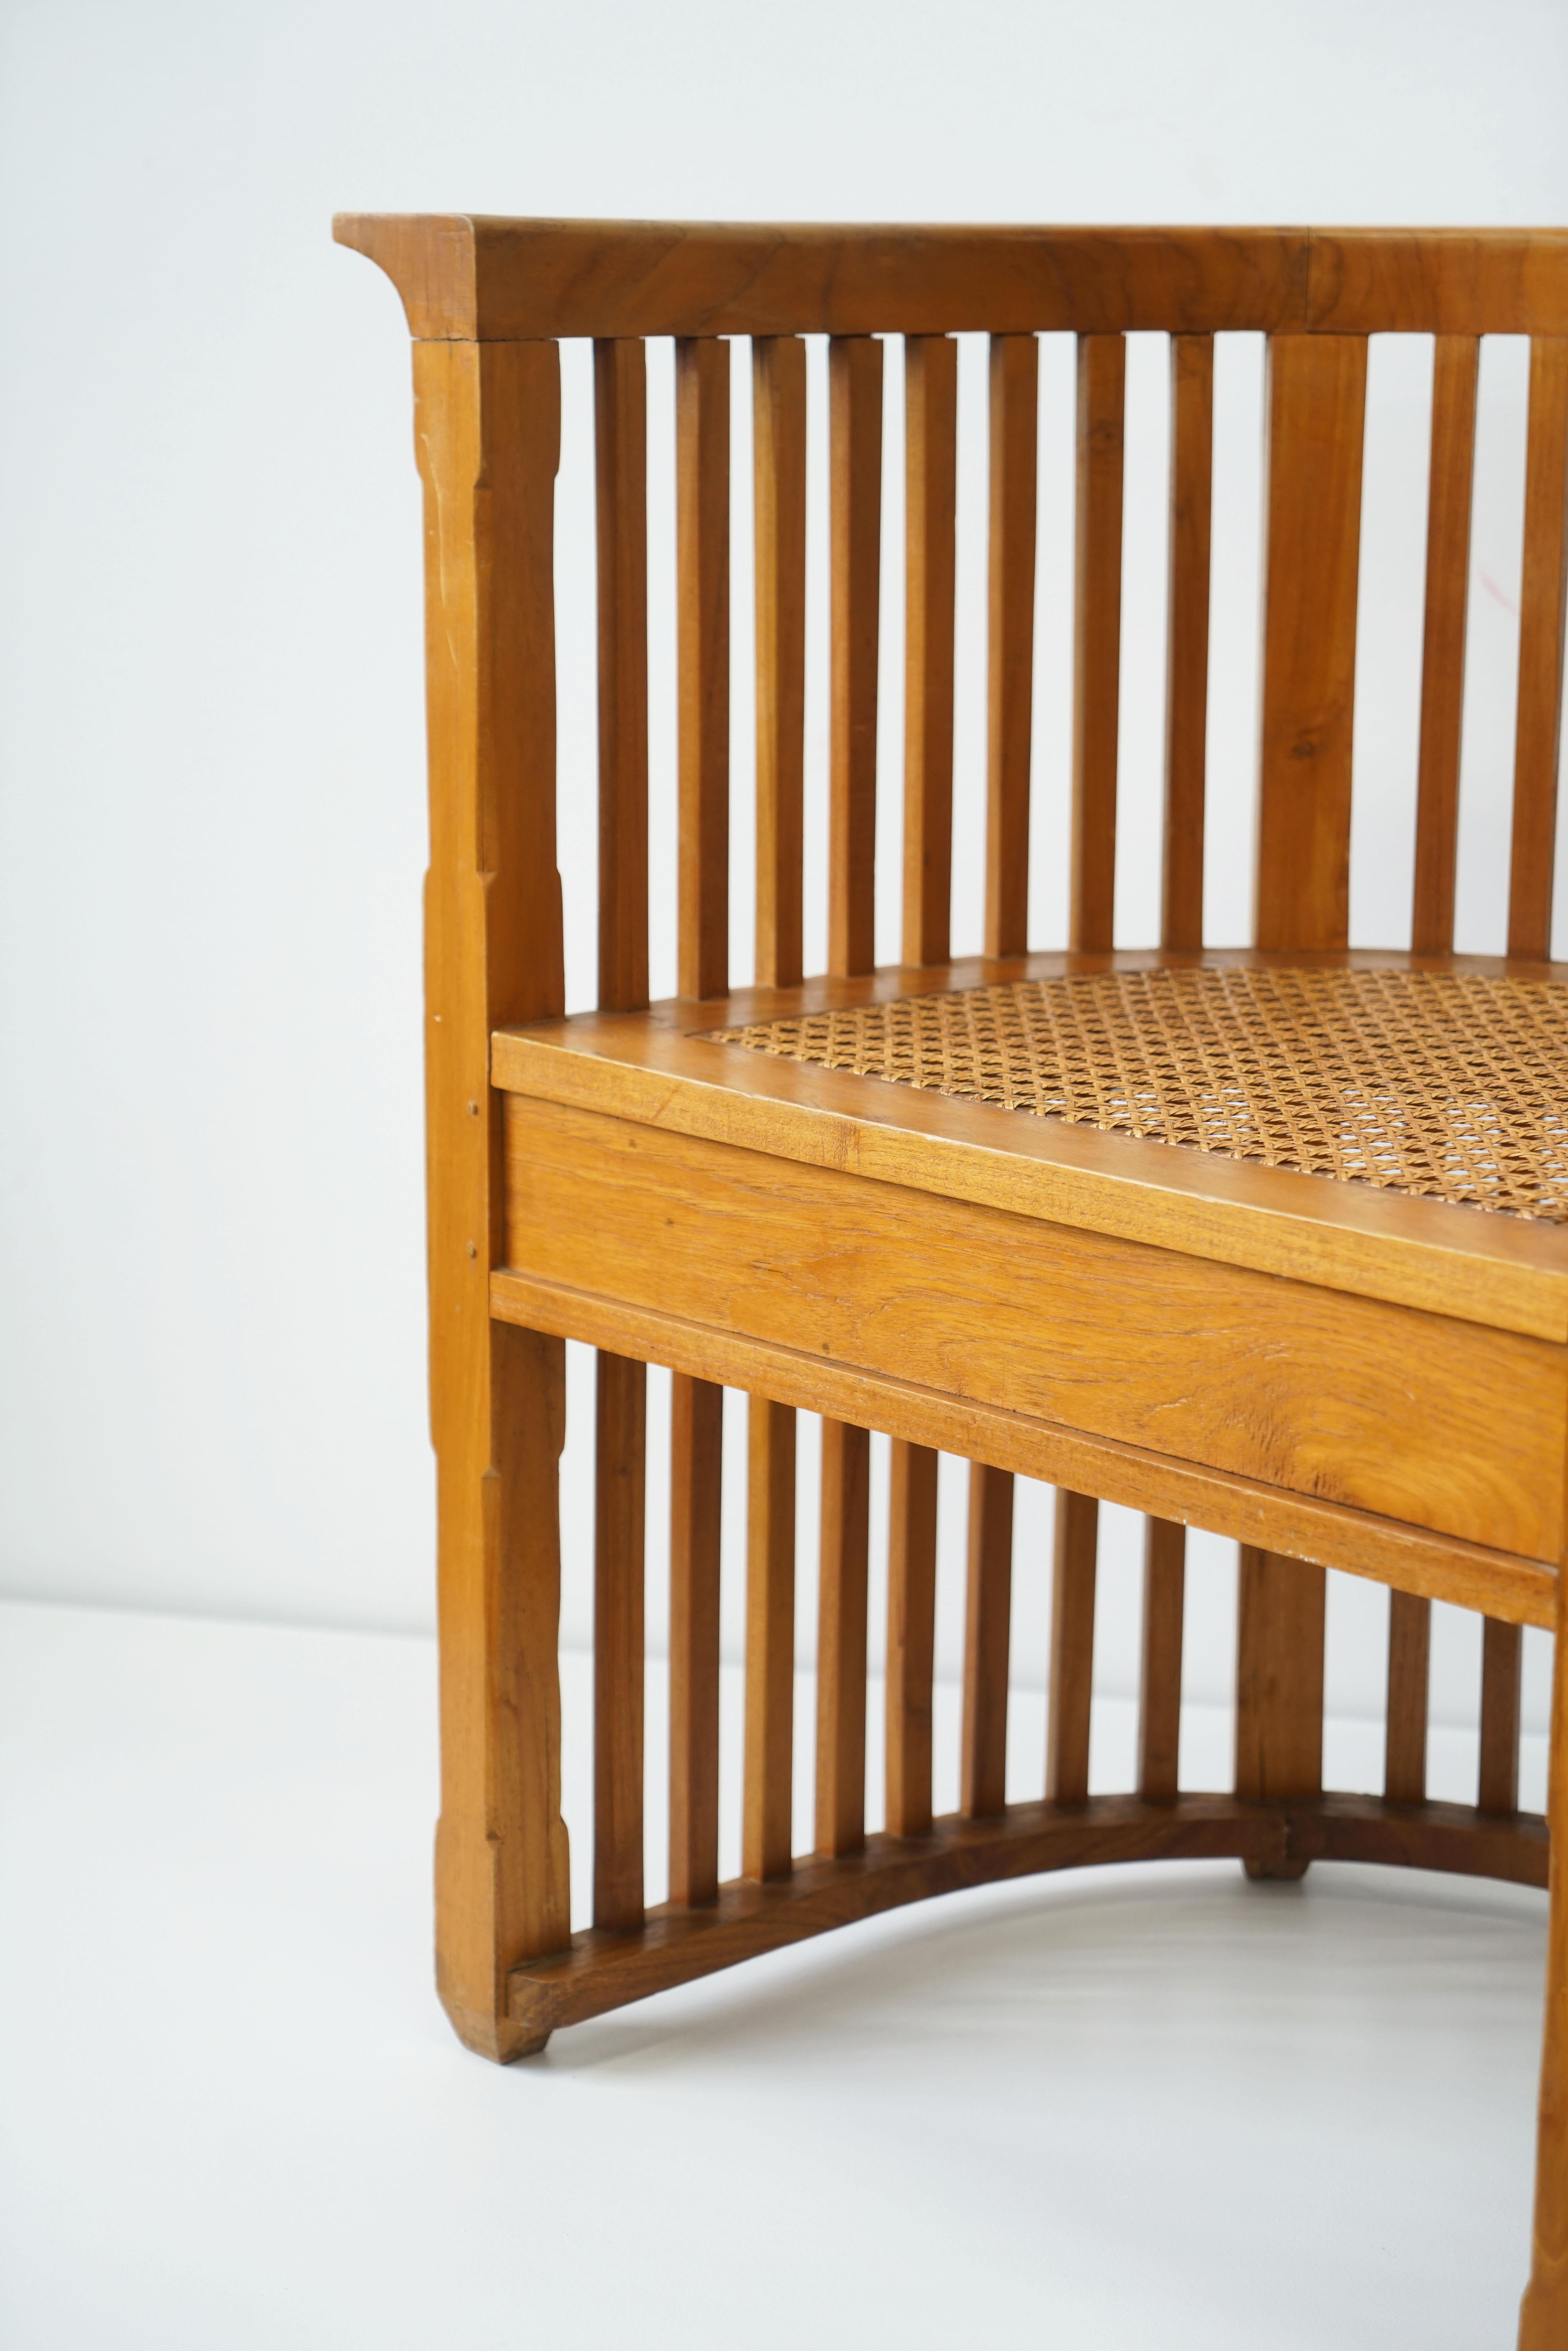 20th Century Vintage Teak Barrel Chair with Cane Seat, in the Manner of Josef Hoffmann